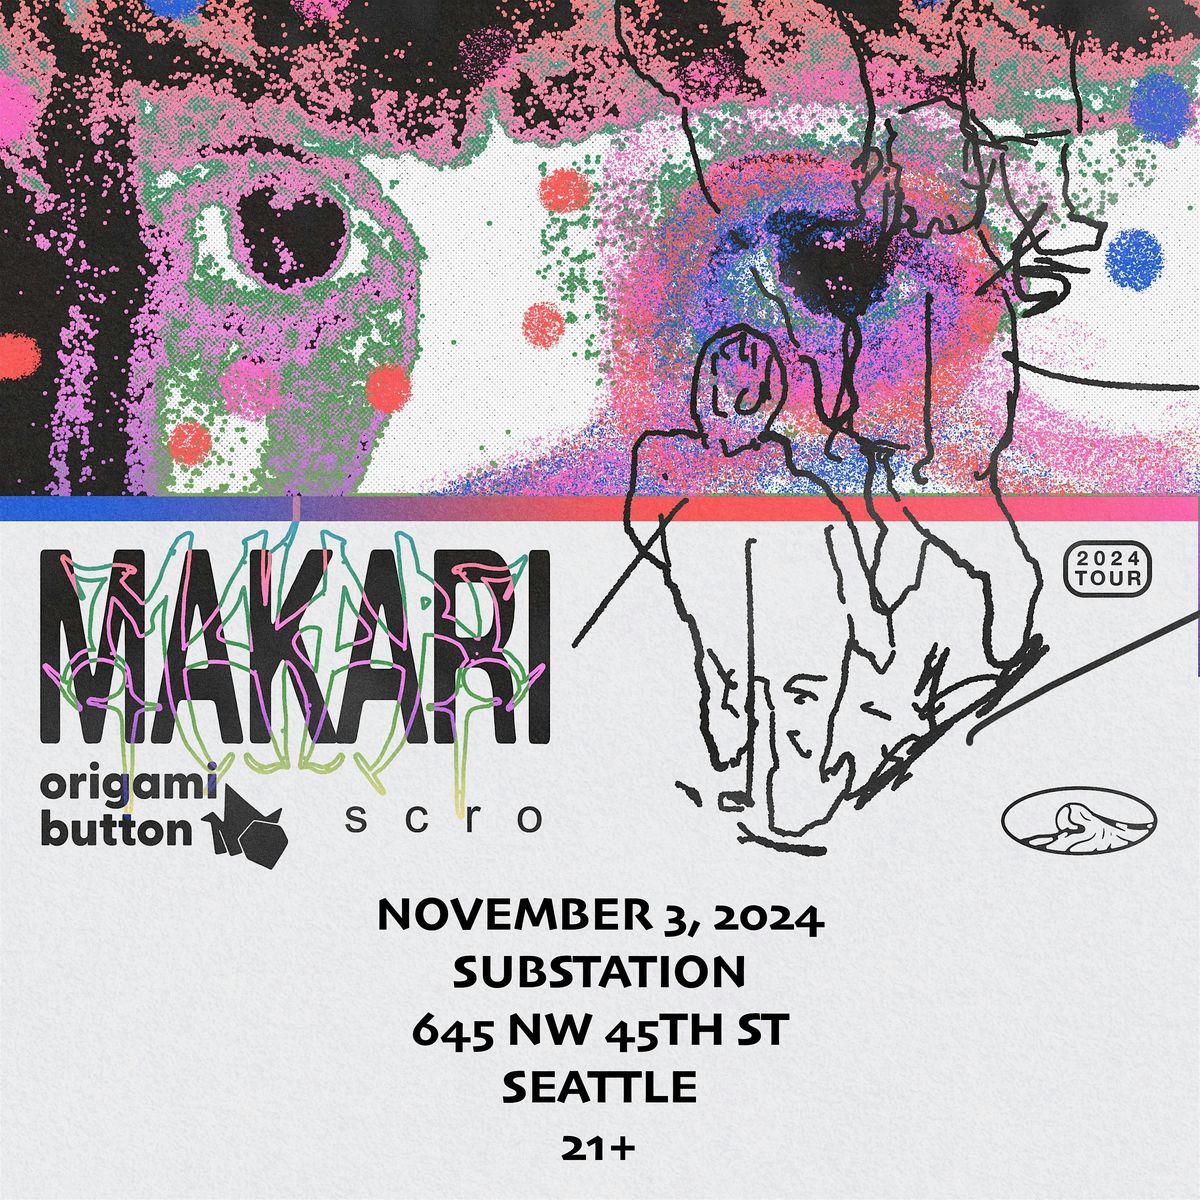 Makari with Origami Button, Scro, and guest